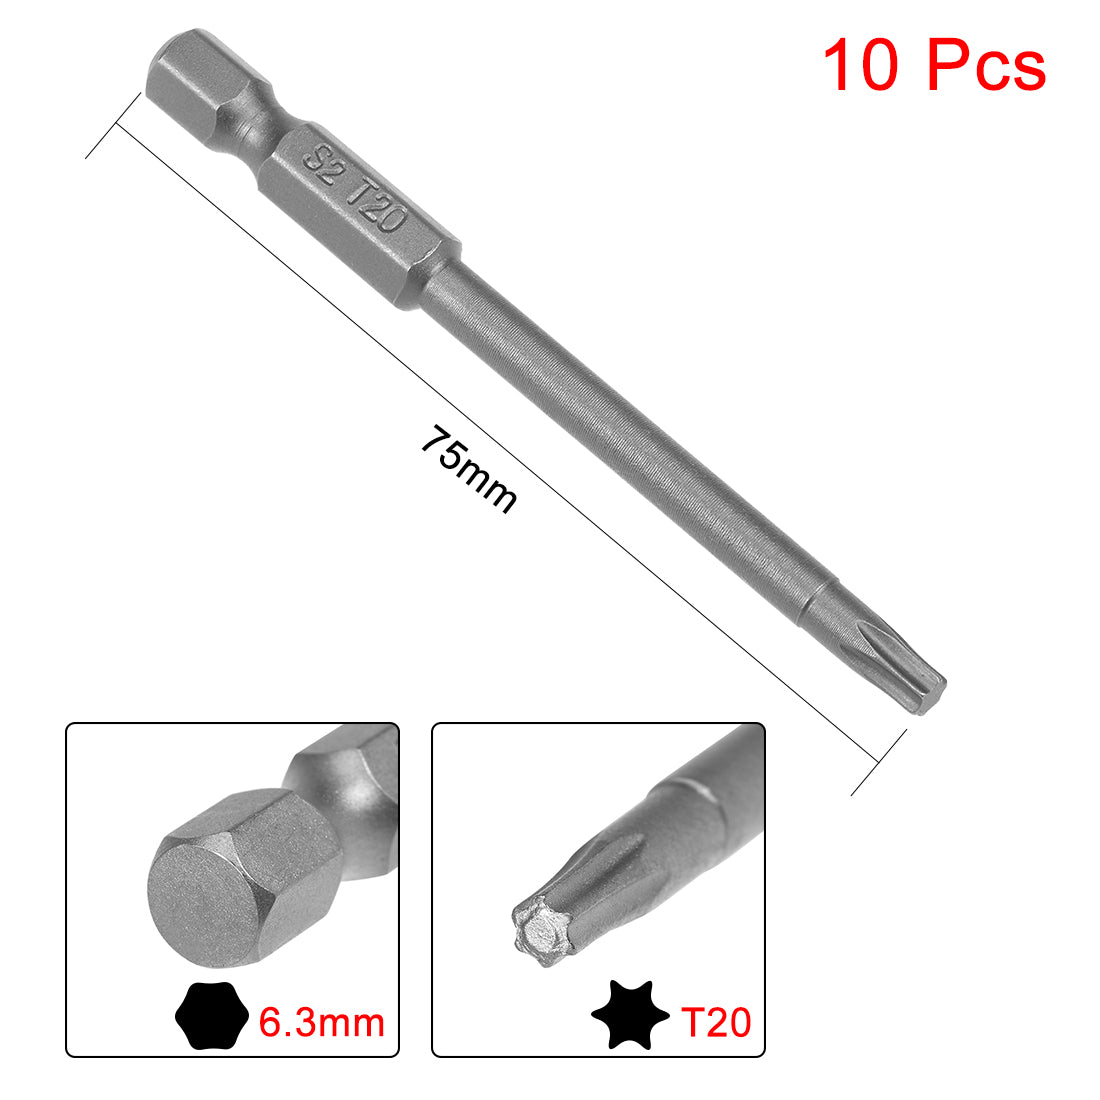 uxcell Uxcell Magnetic Torx Screwdriver Bits Hex Shank S2 Power Tools